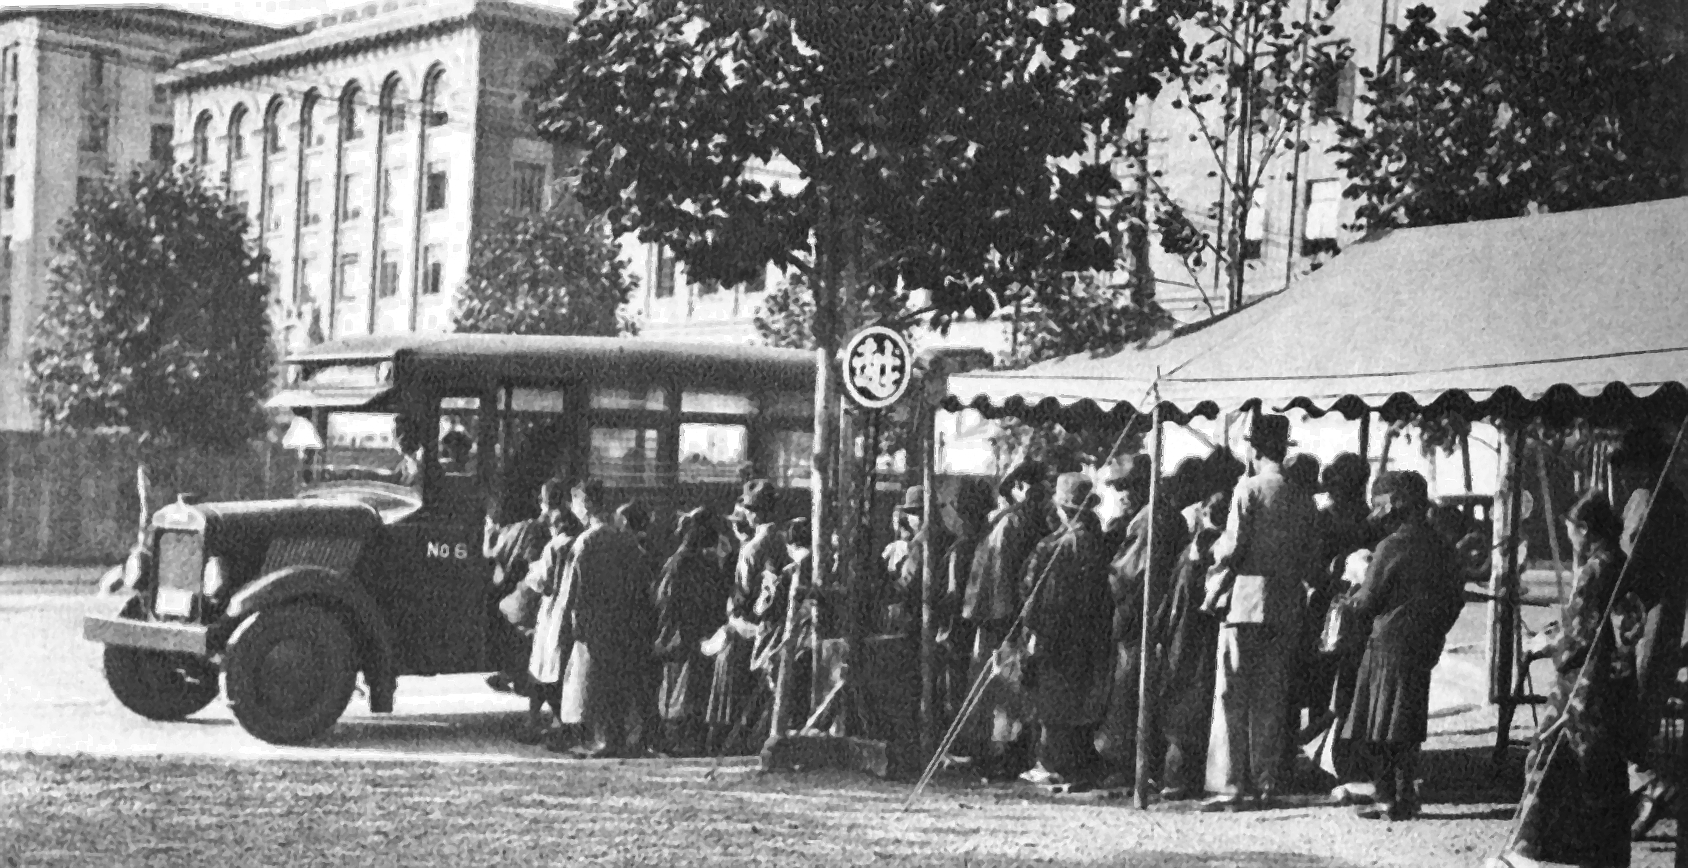 Mitsukoshi was the very first company in Japan to offer a special bus service for its patrons in 1932